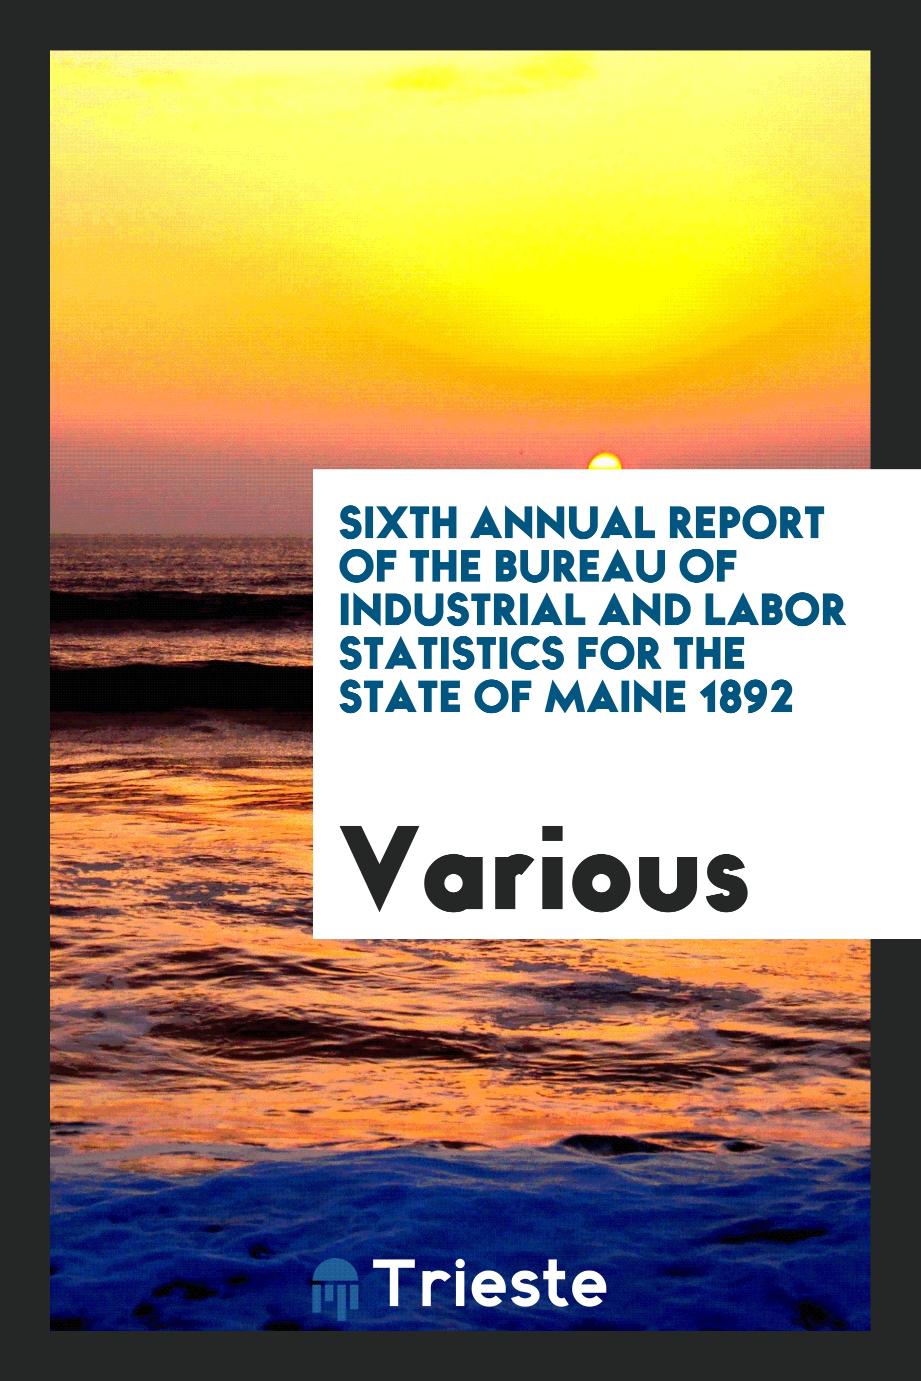 Sixth Annual Report of the Bureau of Industrial and Labor Statistics for the State of Maine 1892